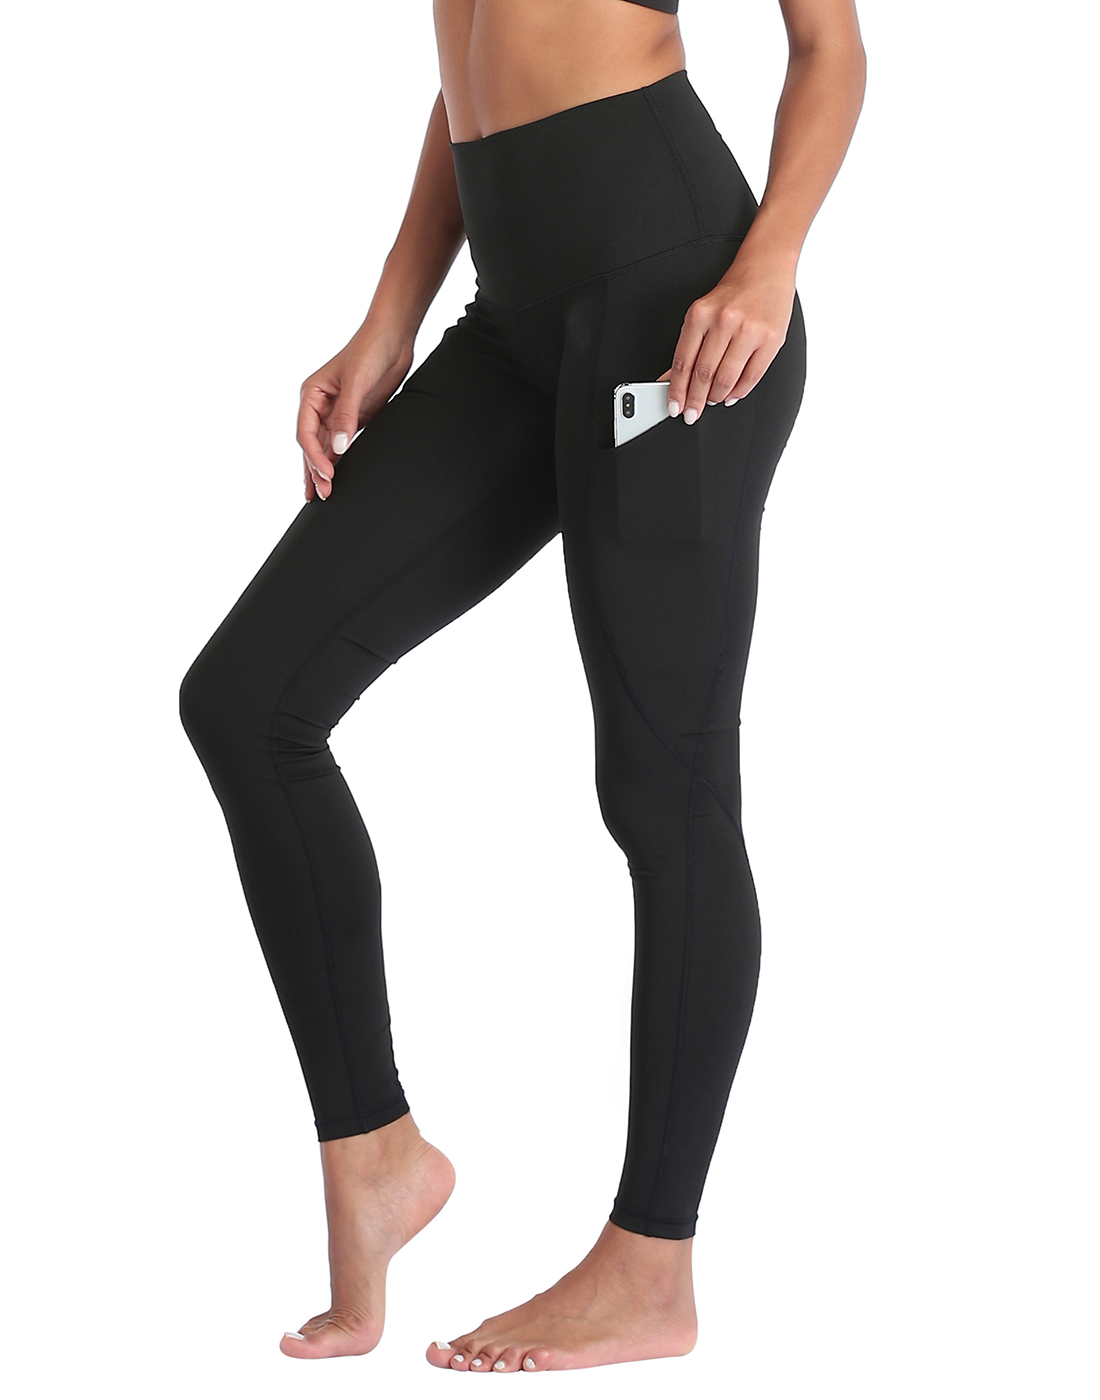 HDE Yoga Pants with Pockets for Women High Waisted Tummy Control Leggings (Black, L) - image 1 of 6